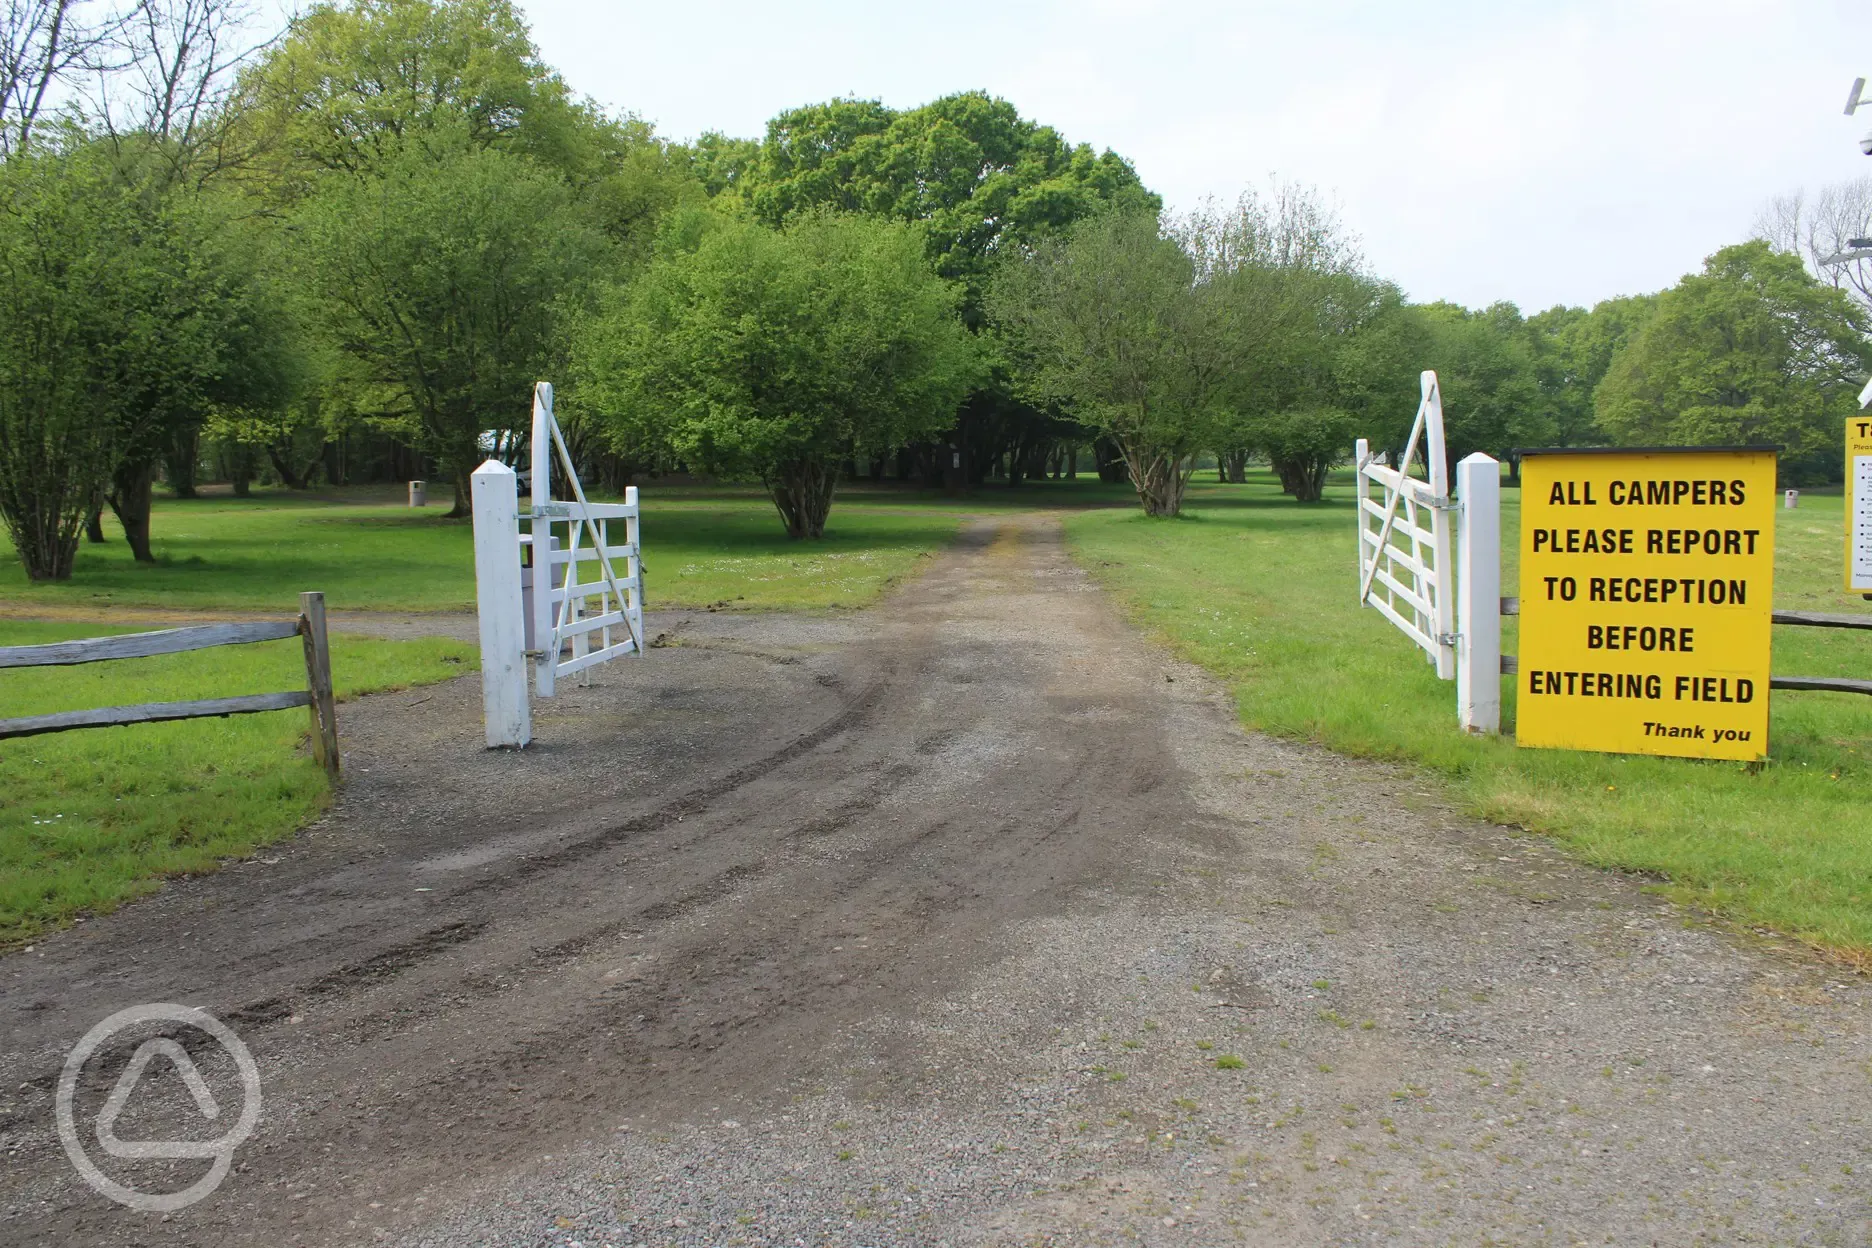 Entrance to the camping field